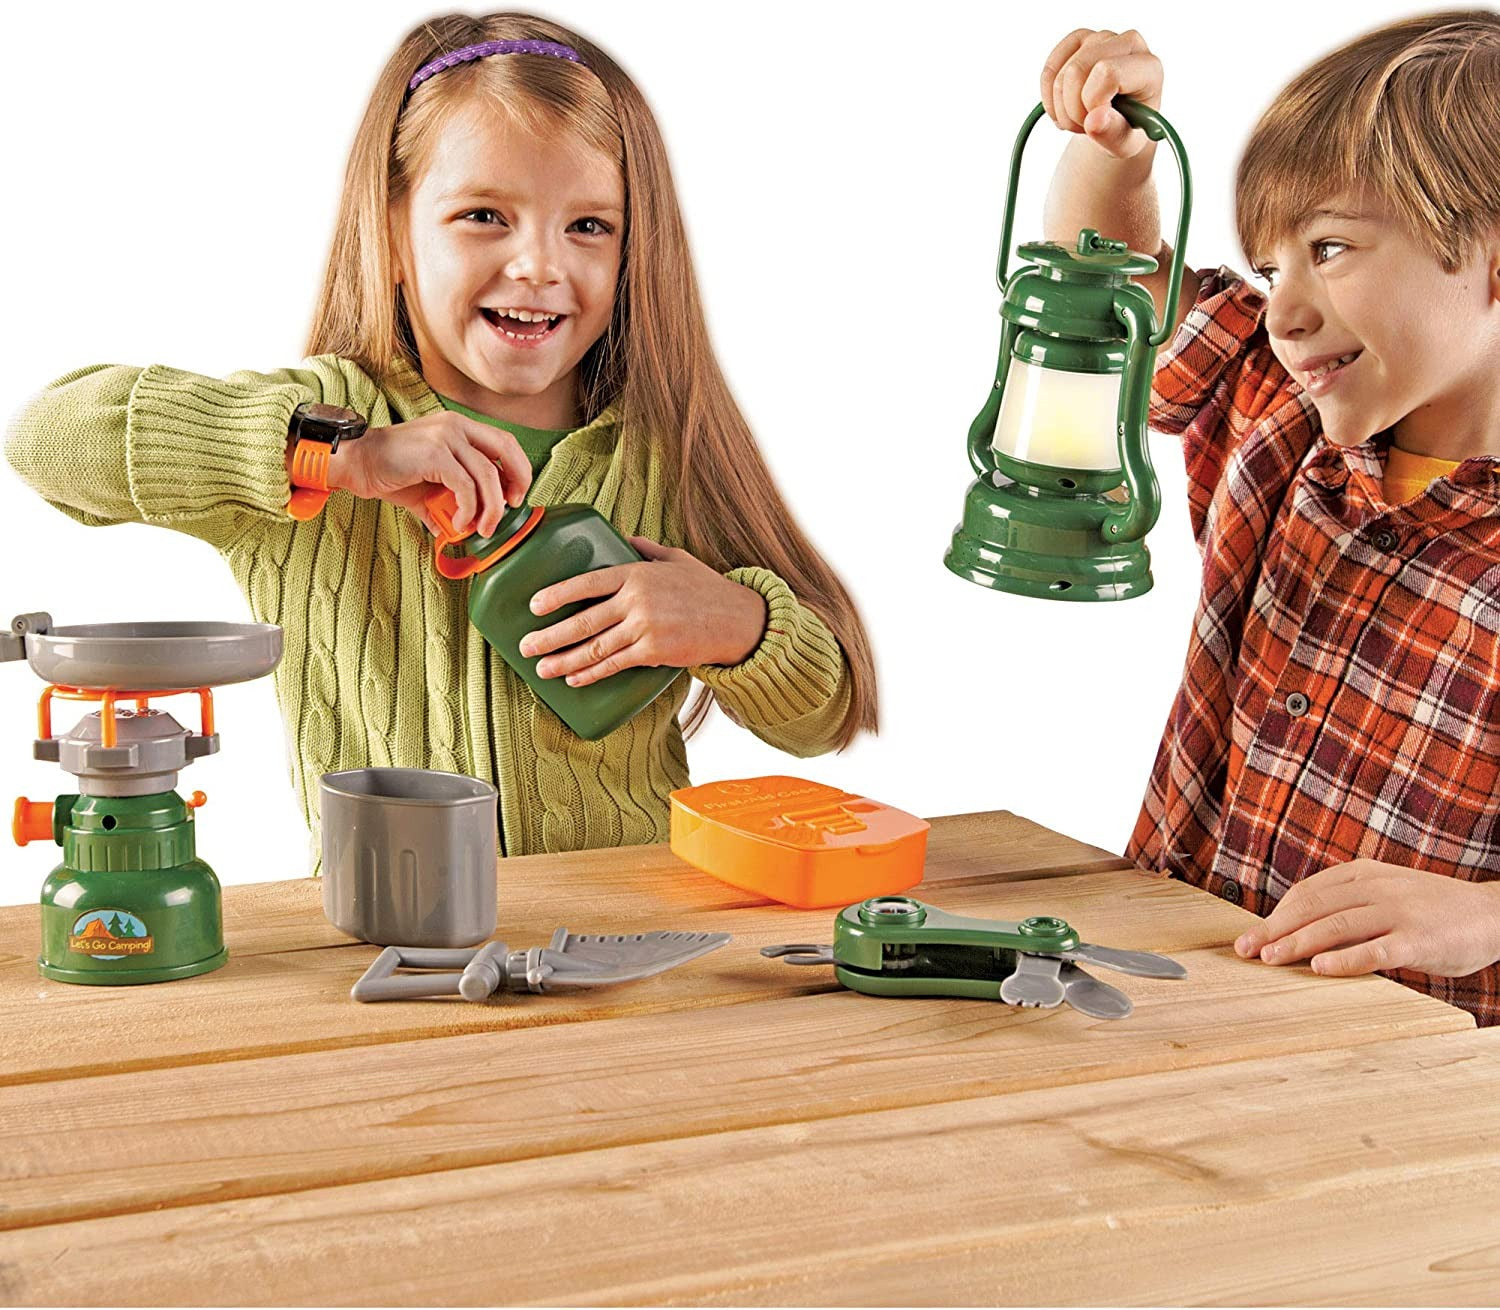 Pretend & Play® Camp Set, Get ready for a thrilling camping adventure with the Pretend & Play® Camp Set! This comprehensive set contains everything children need to ignite their imaginative play and learn valuable skills.With 9 exciting pieces, children can set up their own pretend campsite anywhere they desire. The highlight of the set is the unique light-up lantern and stove. These realistic features require 2 AA batteries (not included) and add an extra layer of authenticity to the camping experience. Ch